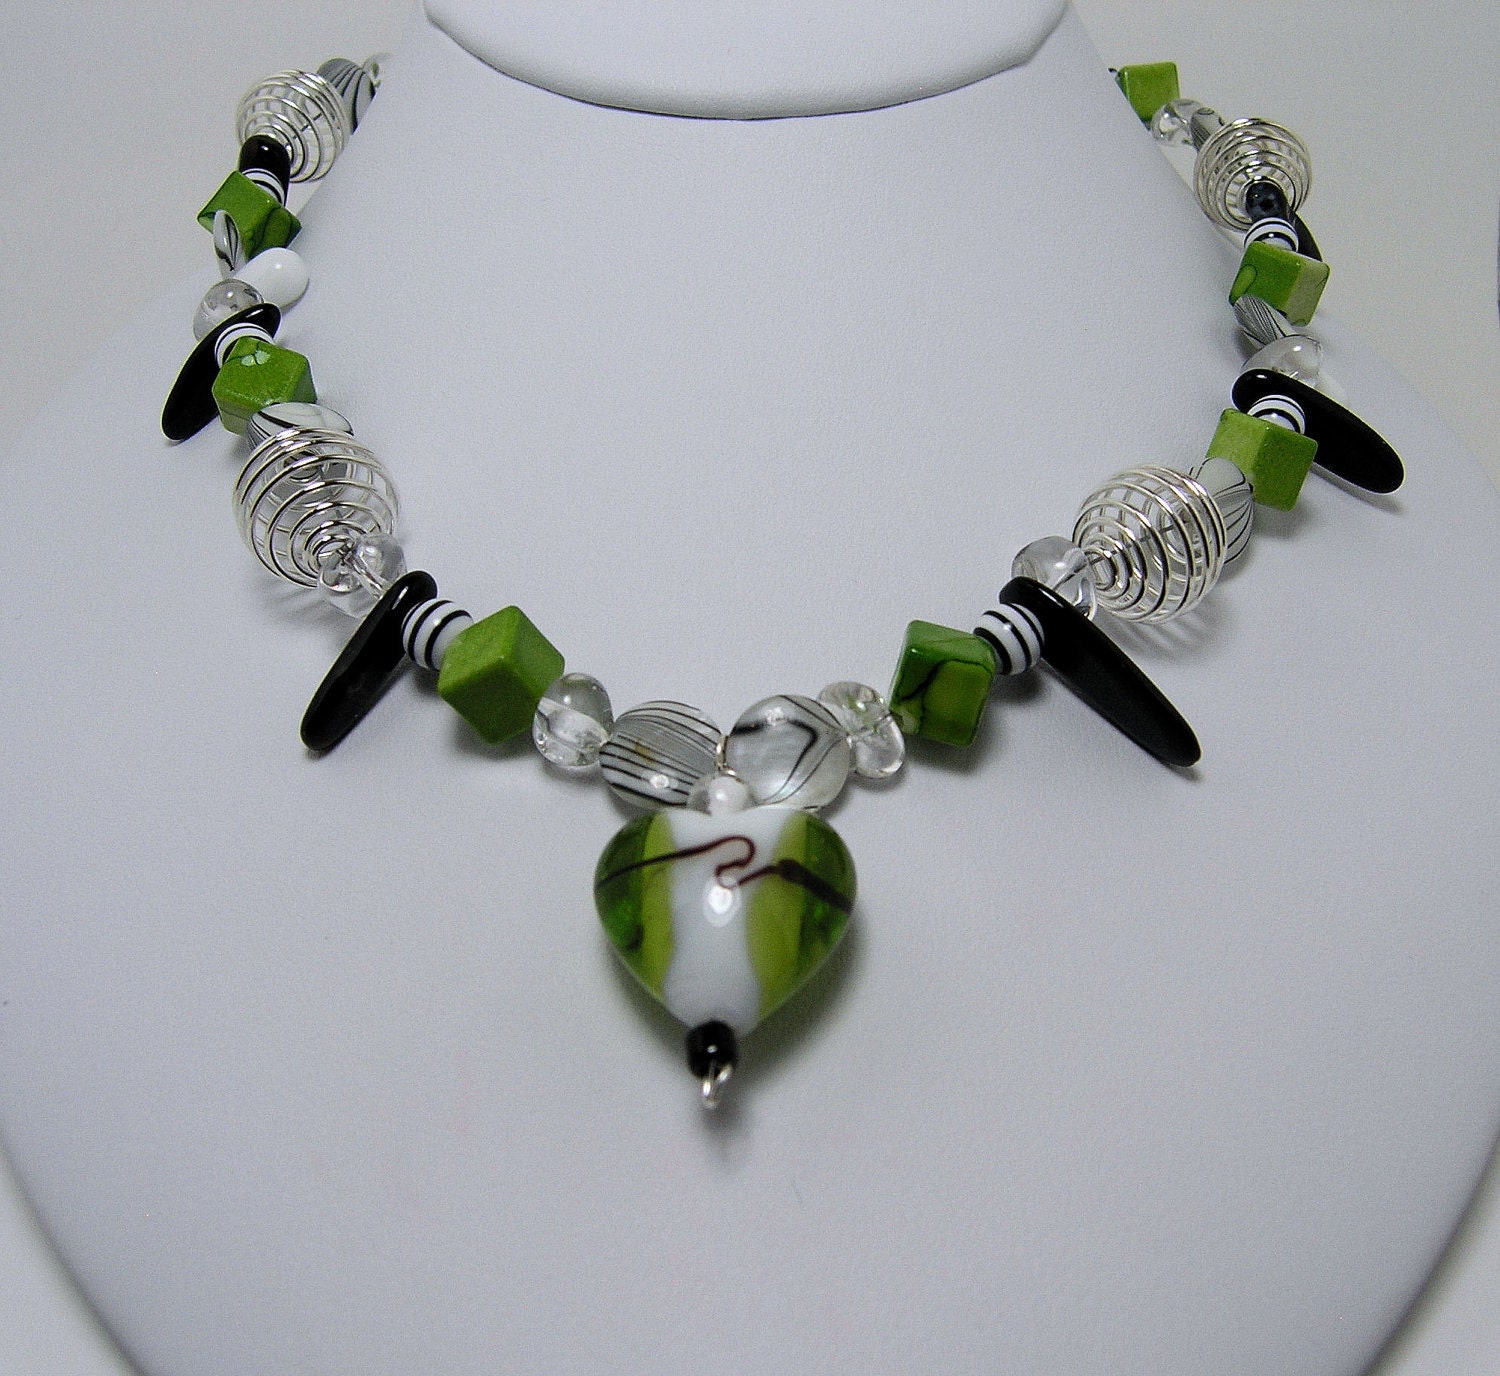 Green Apple Heart necklace with handblown green heart pendant, acrylic cube beads, sterling spirals